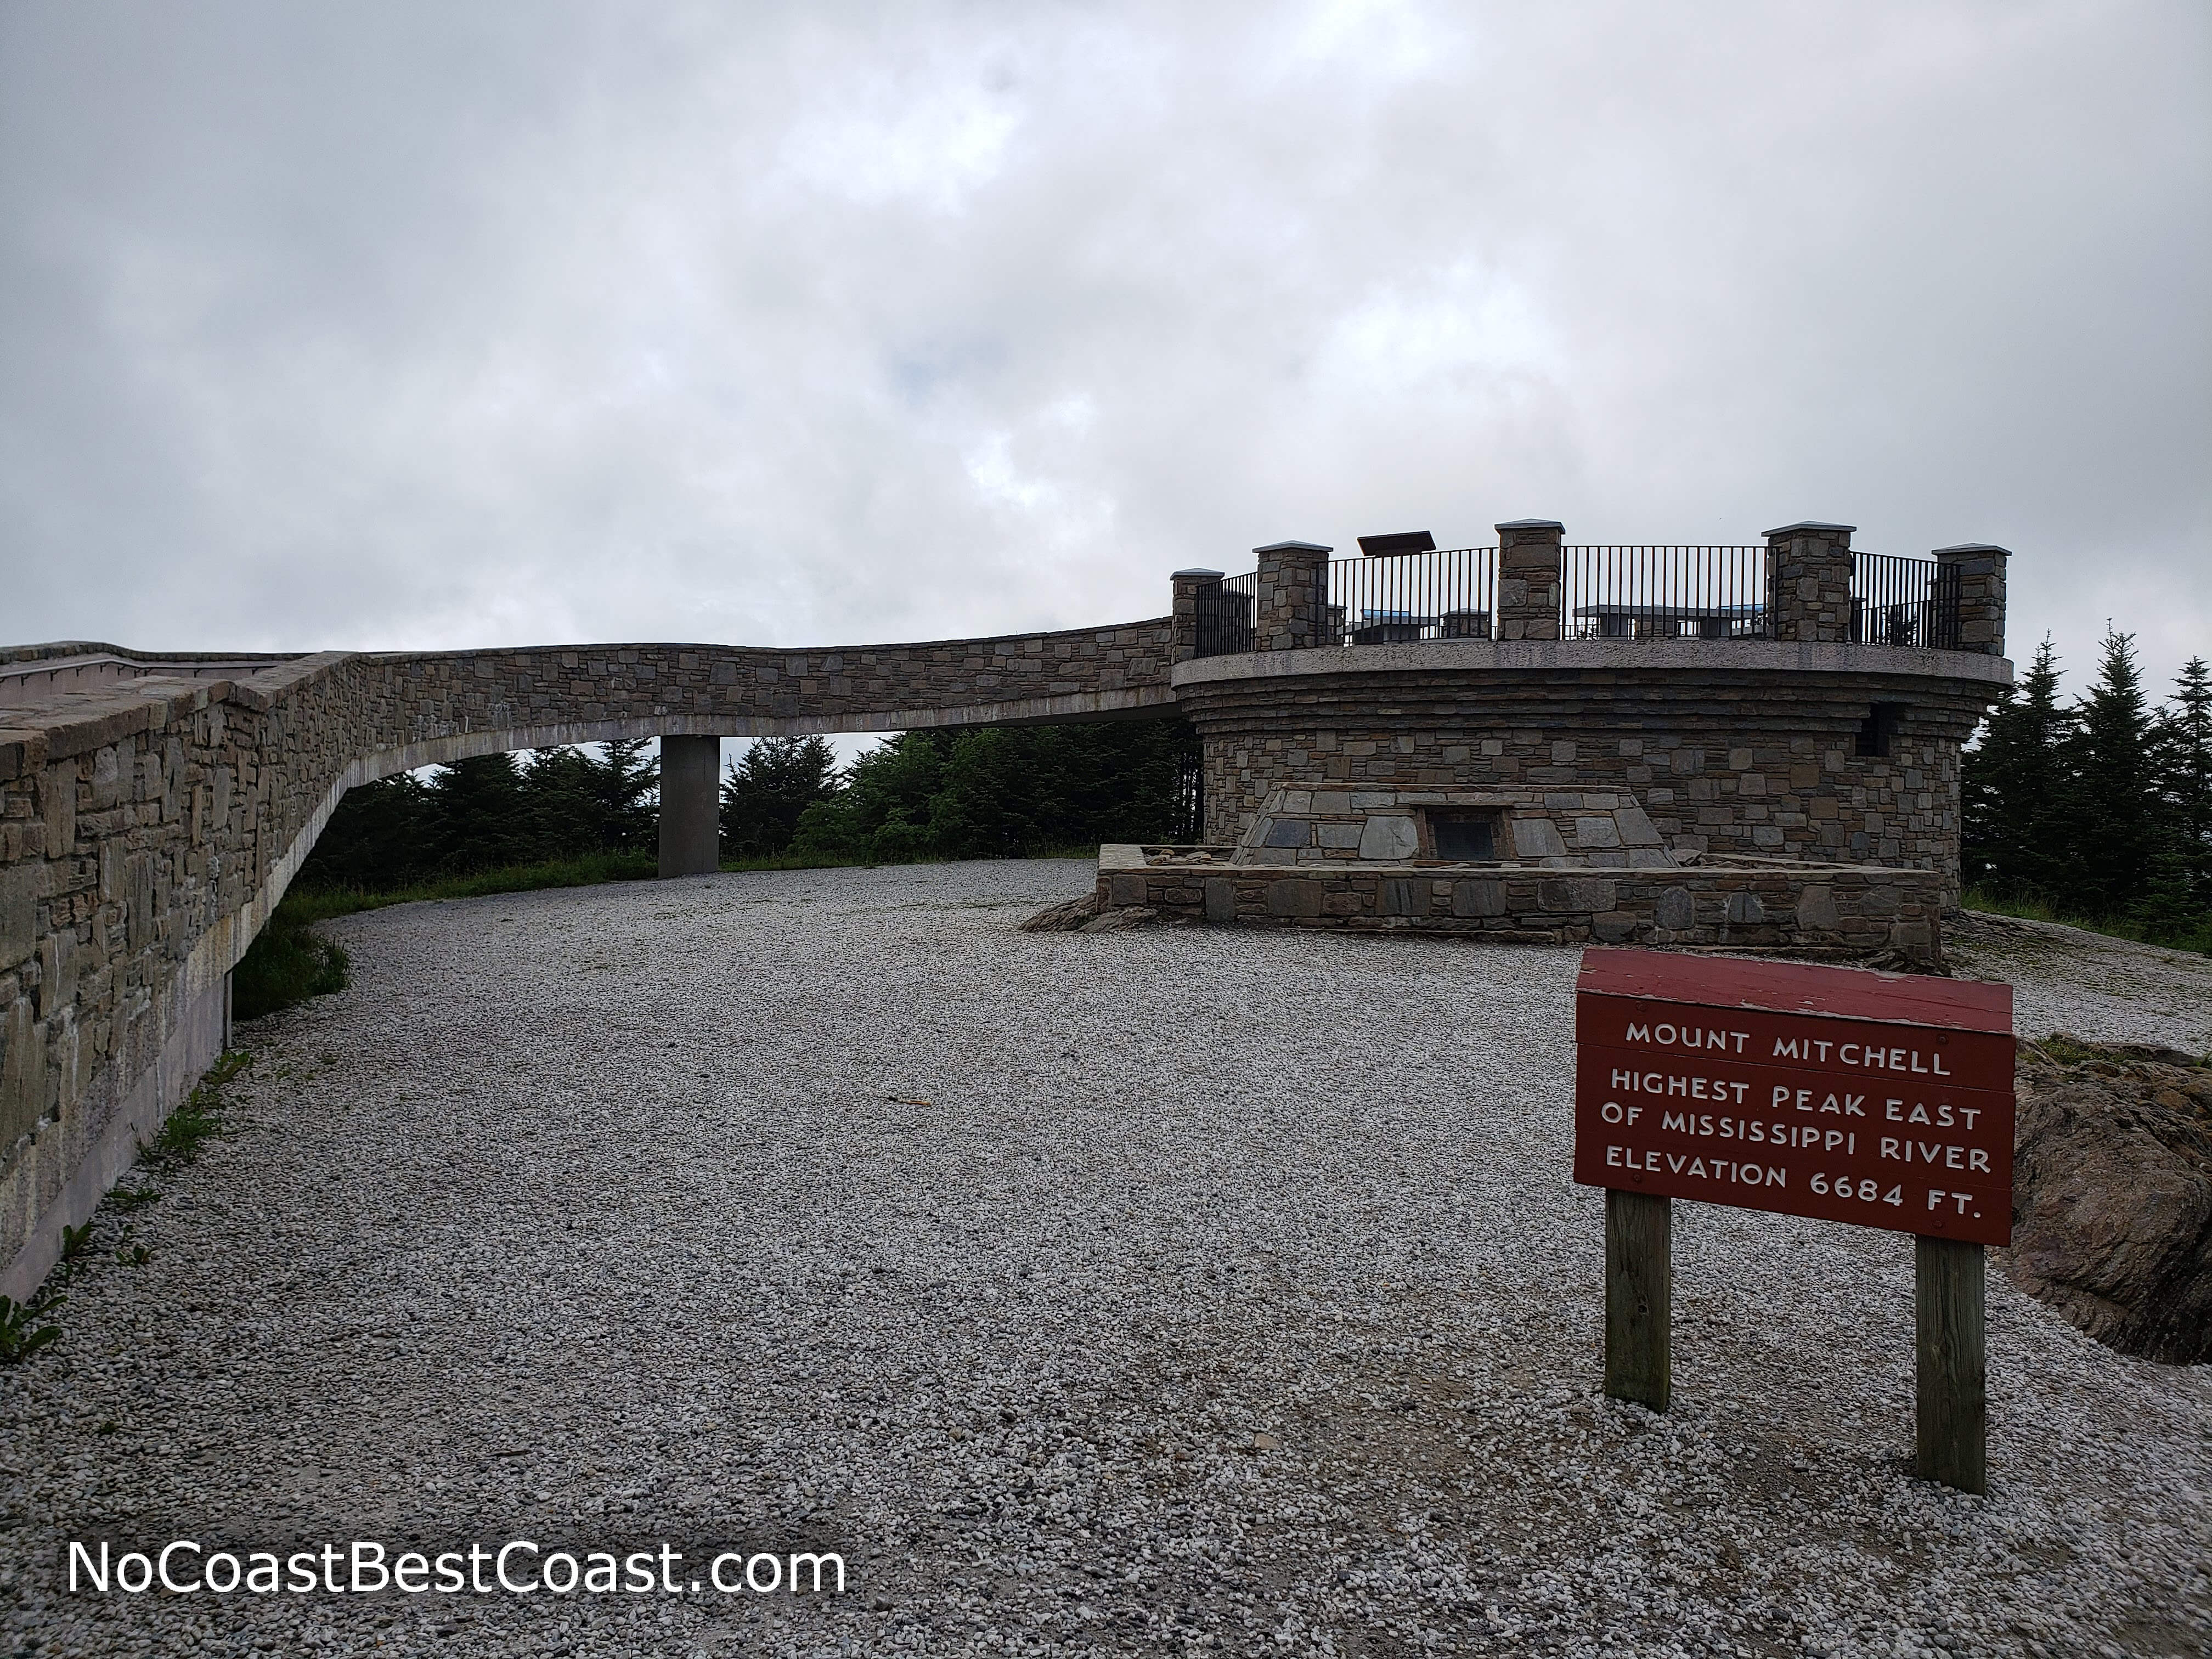 The sign and observation platform on top of Mount Mitchell